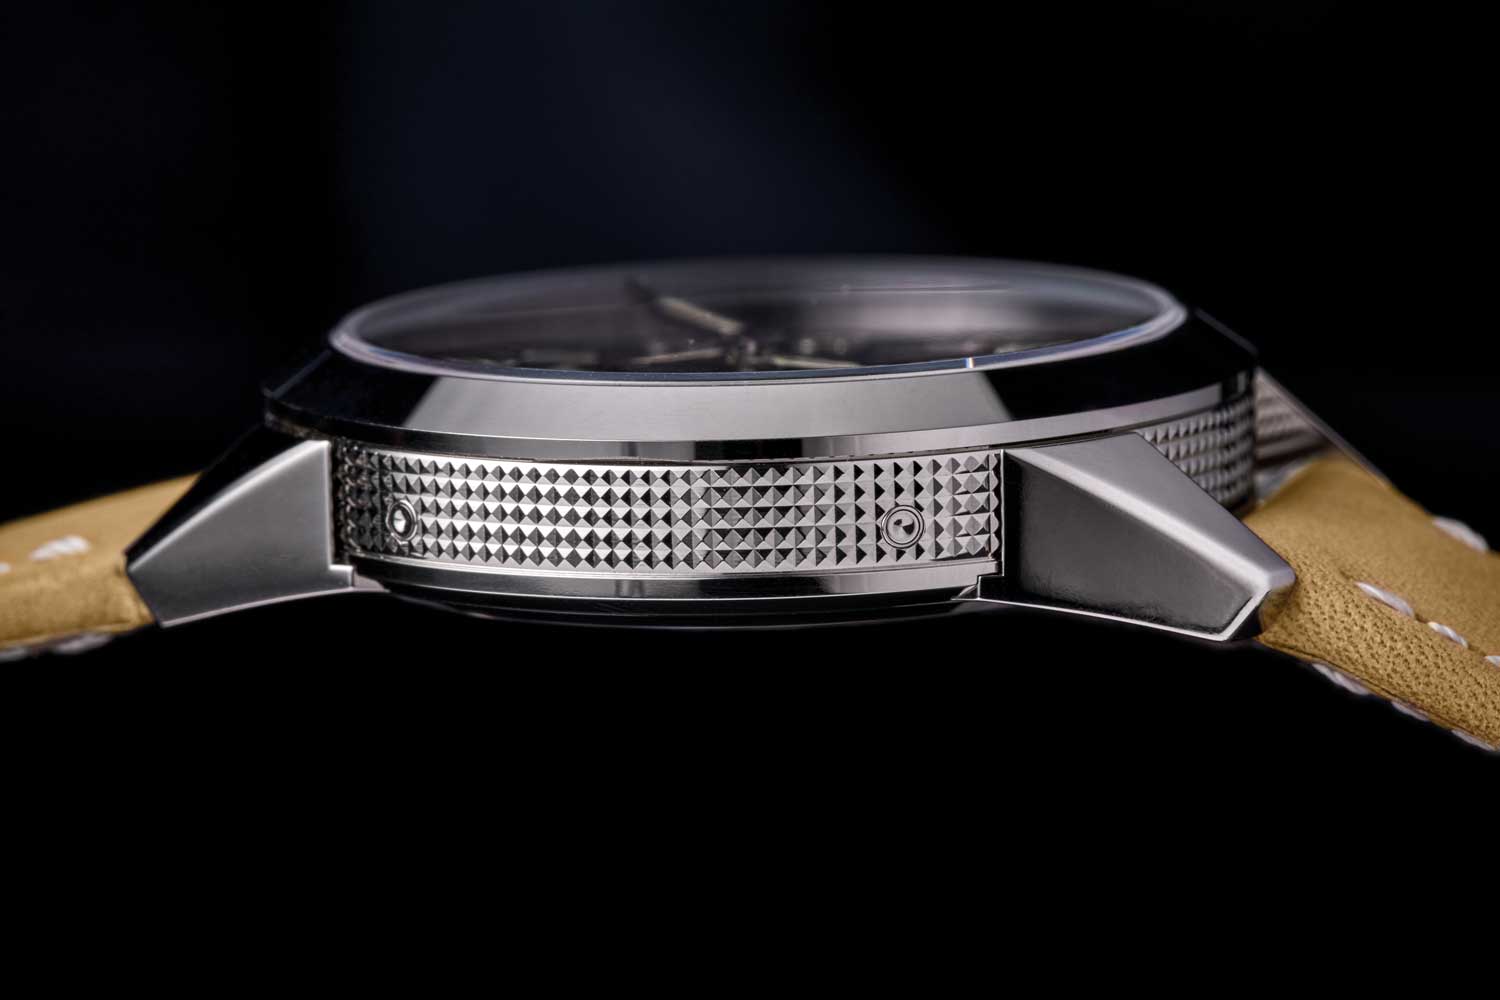 The hobnail pattern on the bezel flows seamlessly beneath the lugs, which are attached to the caseback